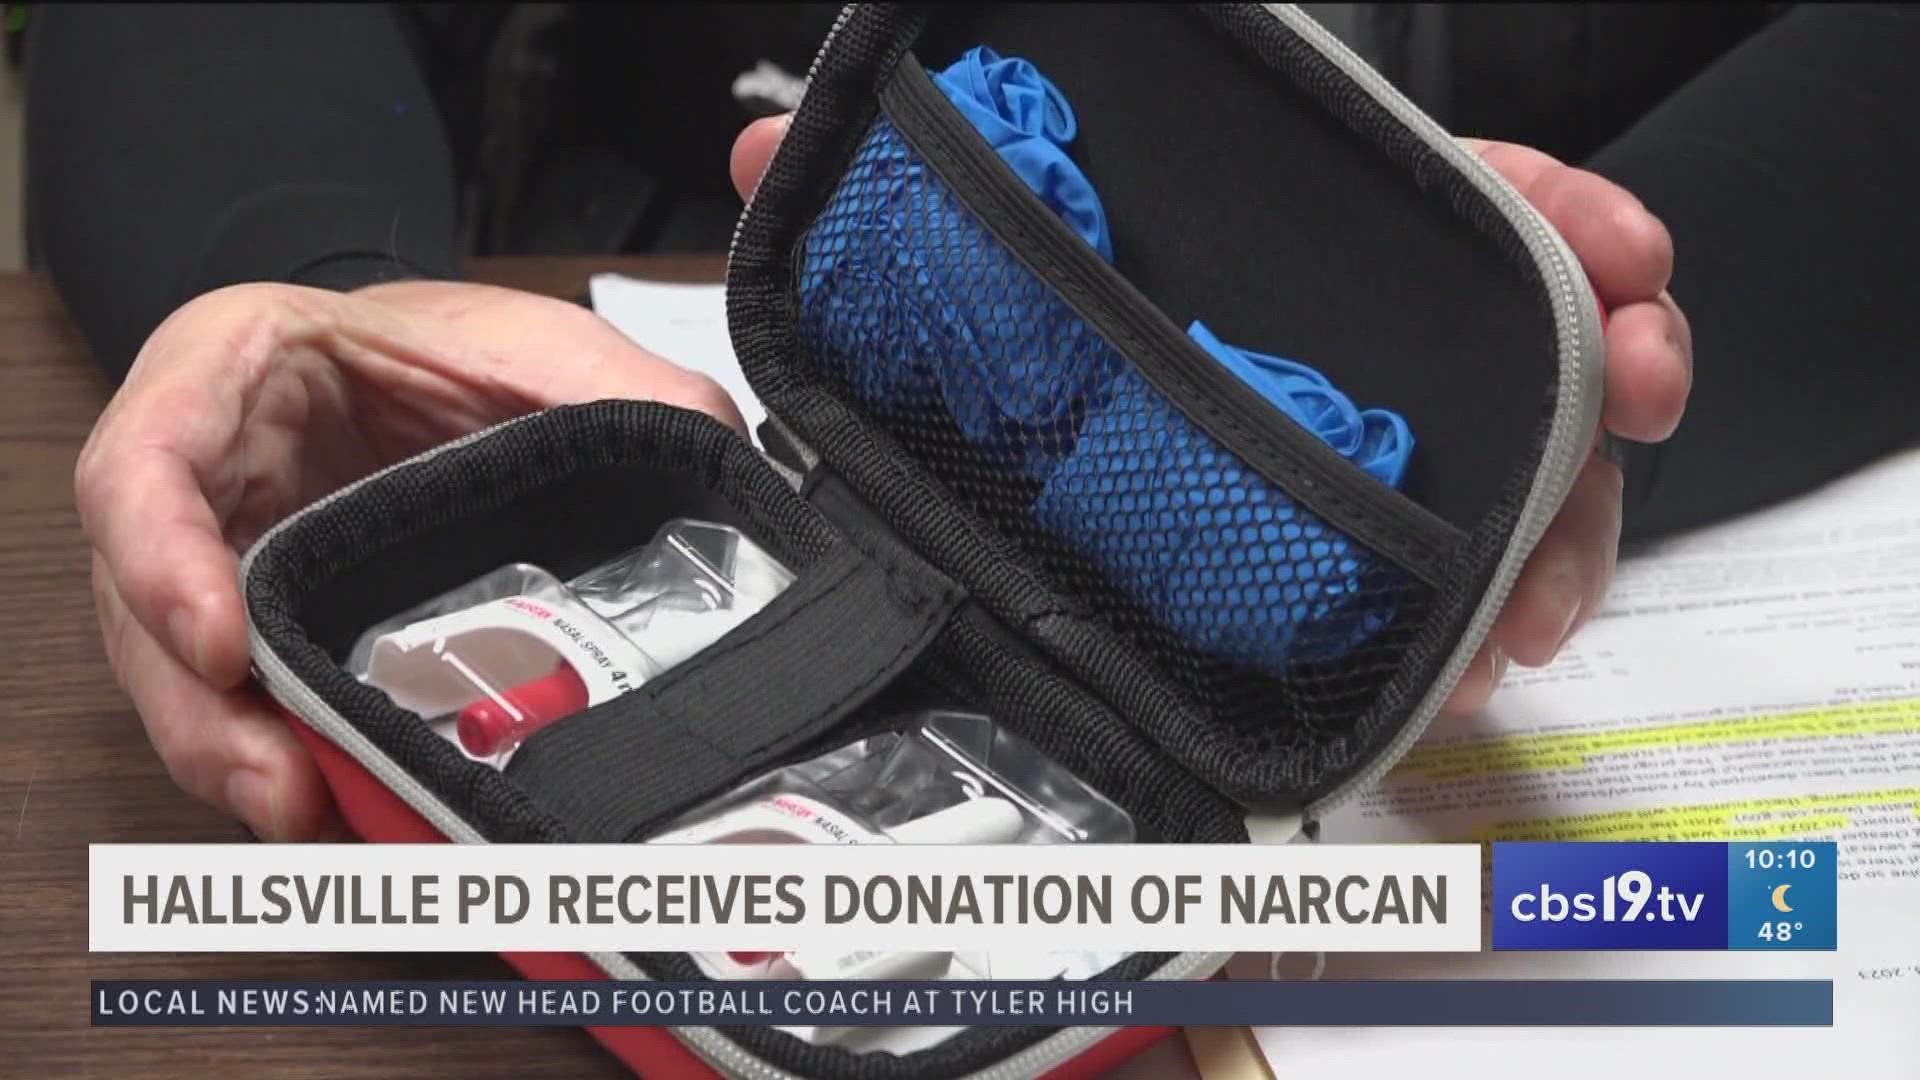 The Hallsville Police Department received its first batch of Narcan donated by Walmart. Narcan is a medication used to treat and reduce the effects of opioids.